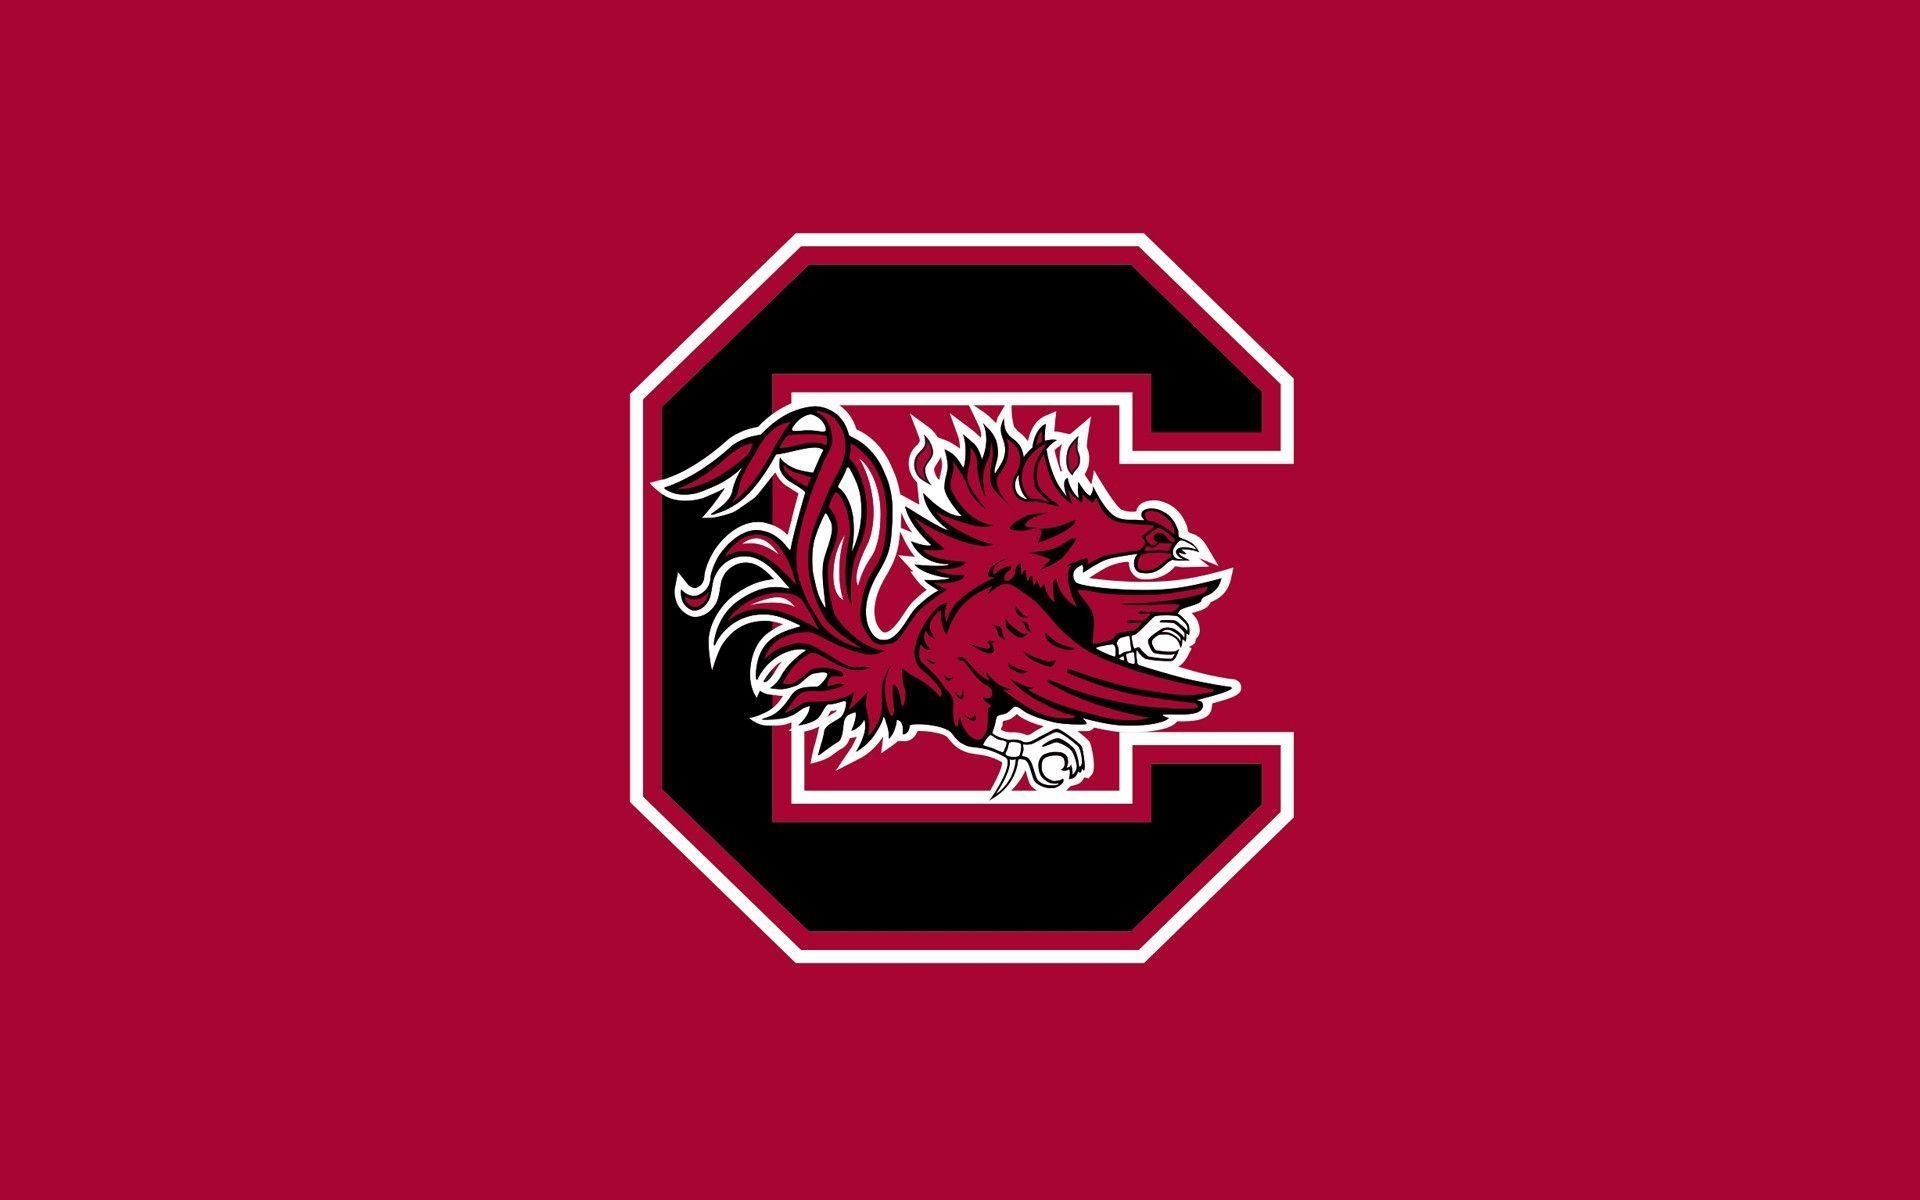 10 Top University Of South Carolina Wallpaper FULL HD 1080p For PC Background